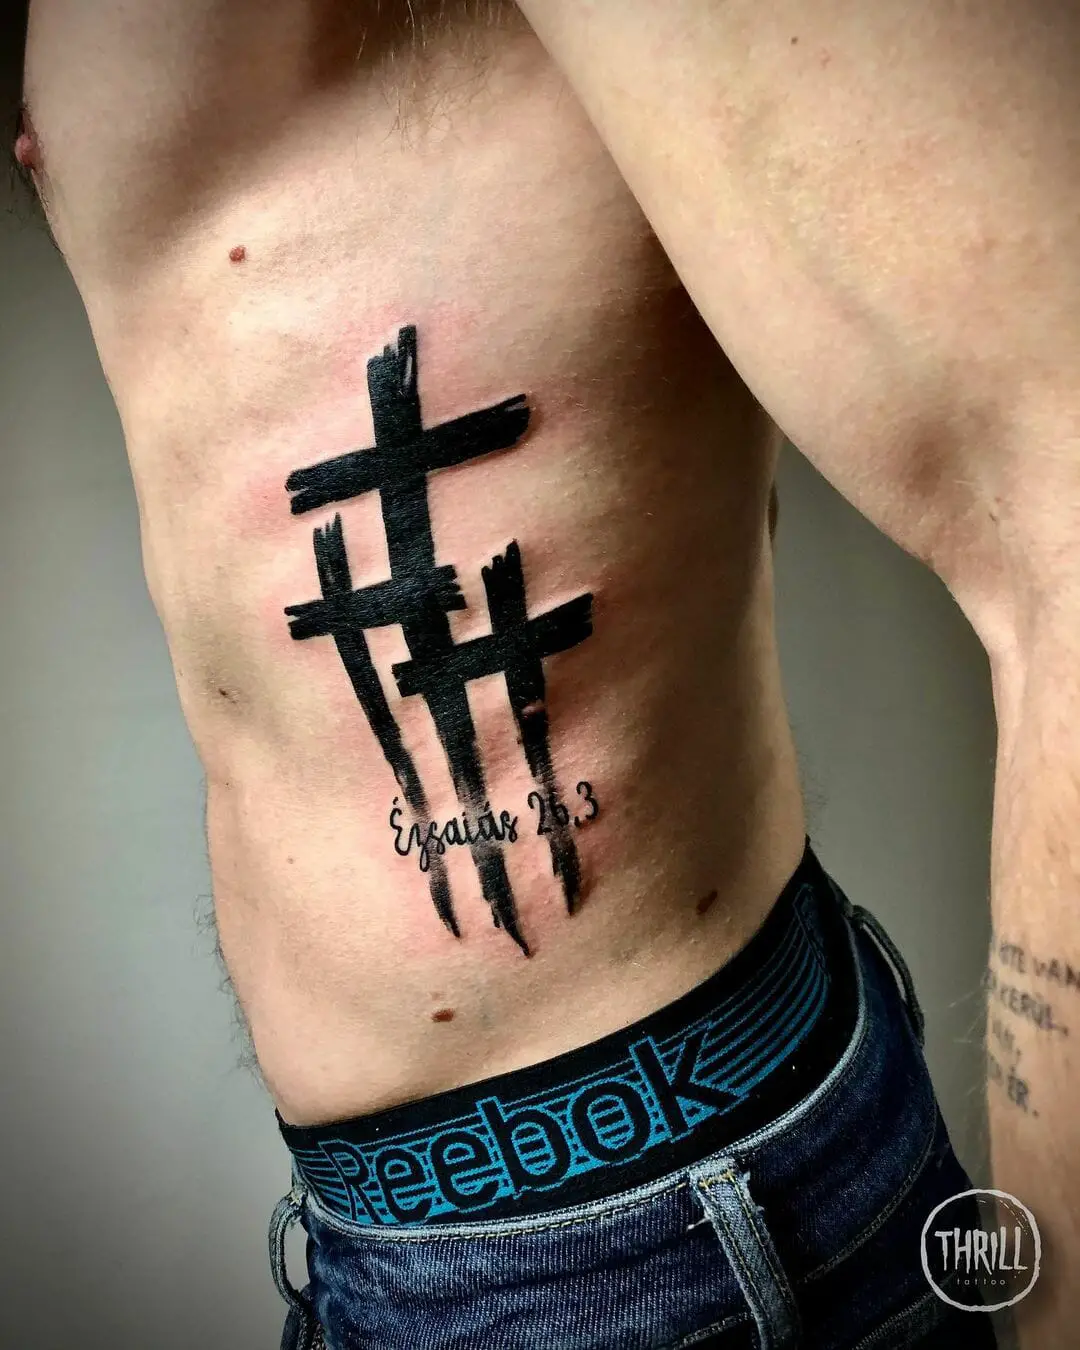 87 Awesome Trending Cross Tattoos Designs To Try Right Now On Ribs - Psycho Tats